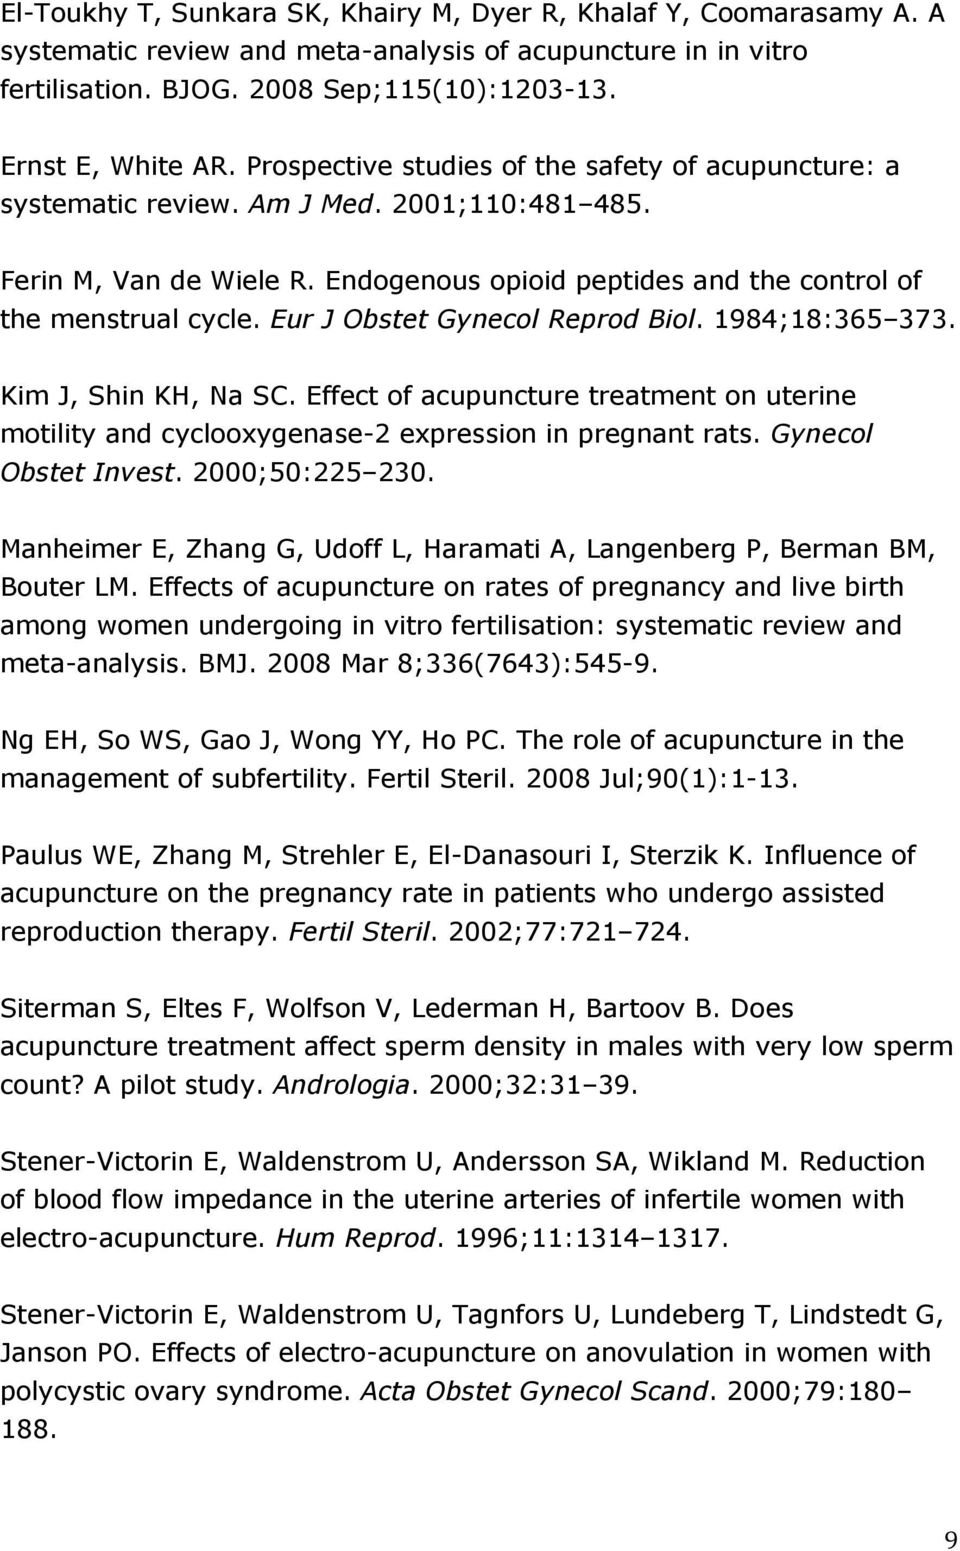 Eur J Obstet Gynecol Reprod Biol. 1984;18:365 373. Kim J, Shin KH, Na SC. Effect of acupuncture treatment on uterine motility and cyclooxygenase-2 expression in pregnant rats. Gynecol Obstet Invest.